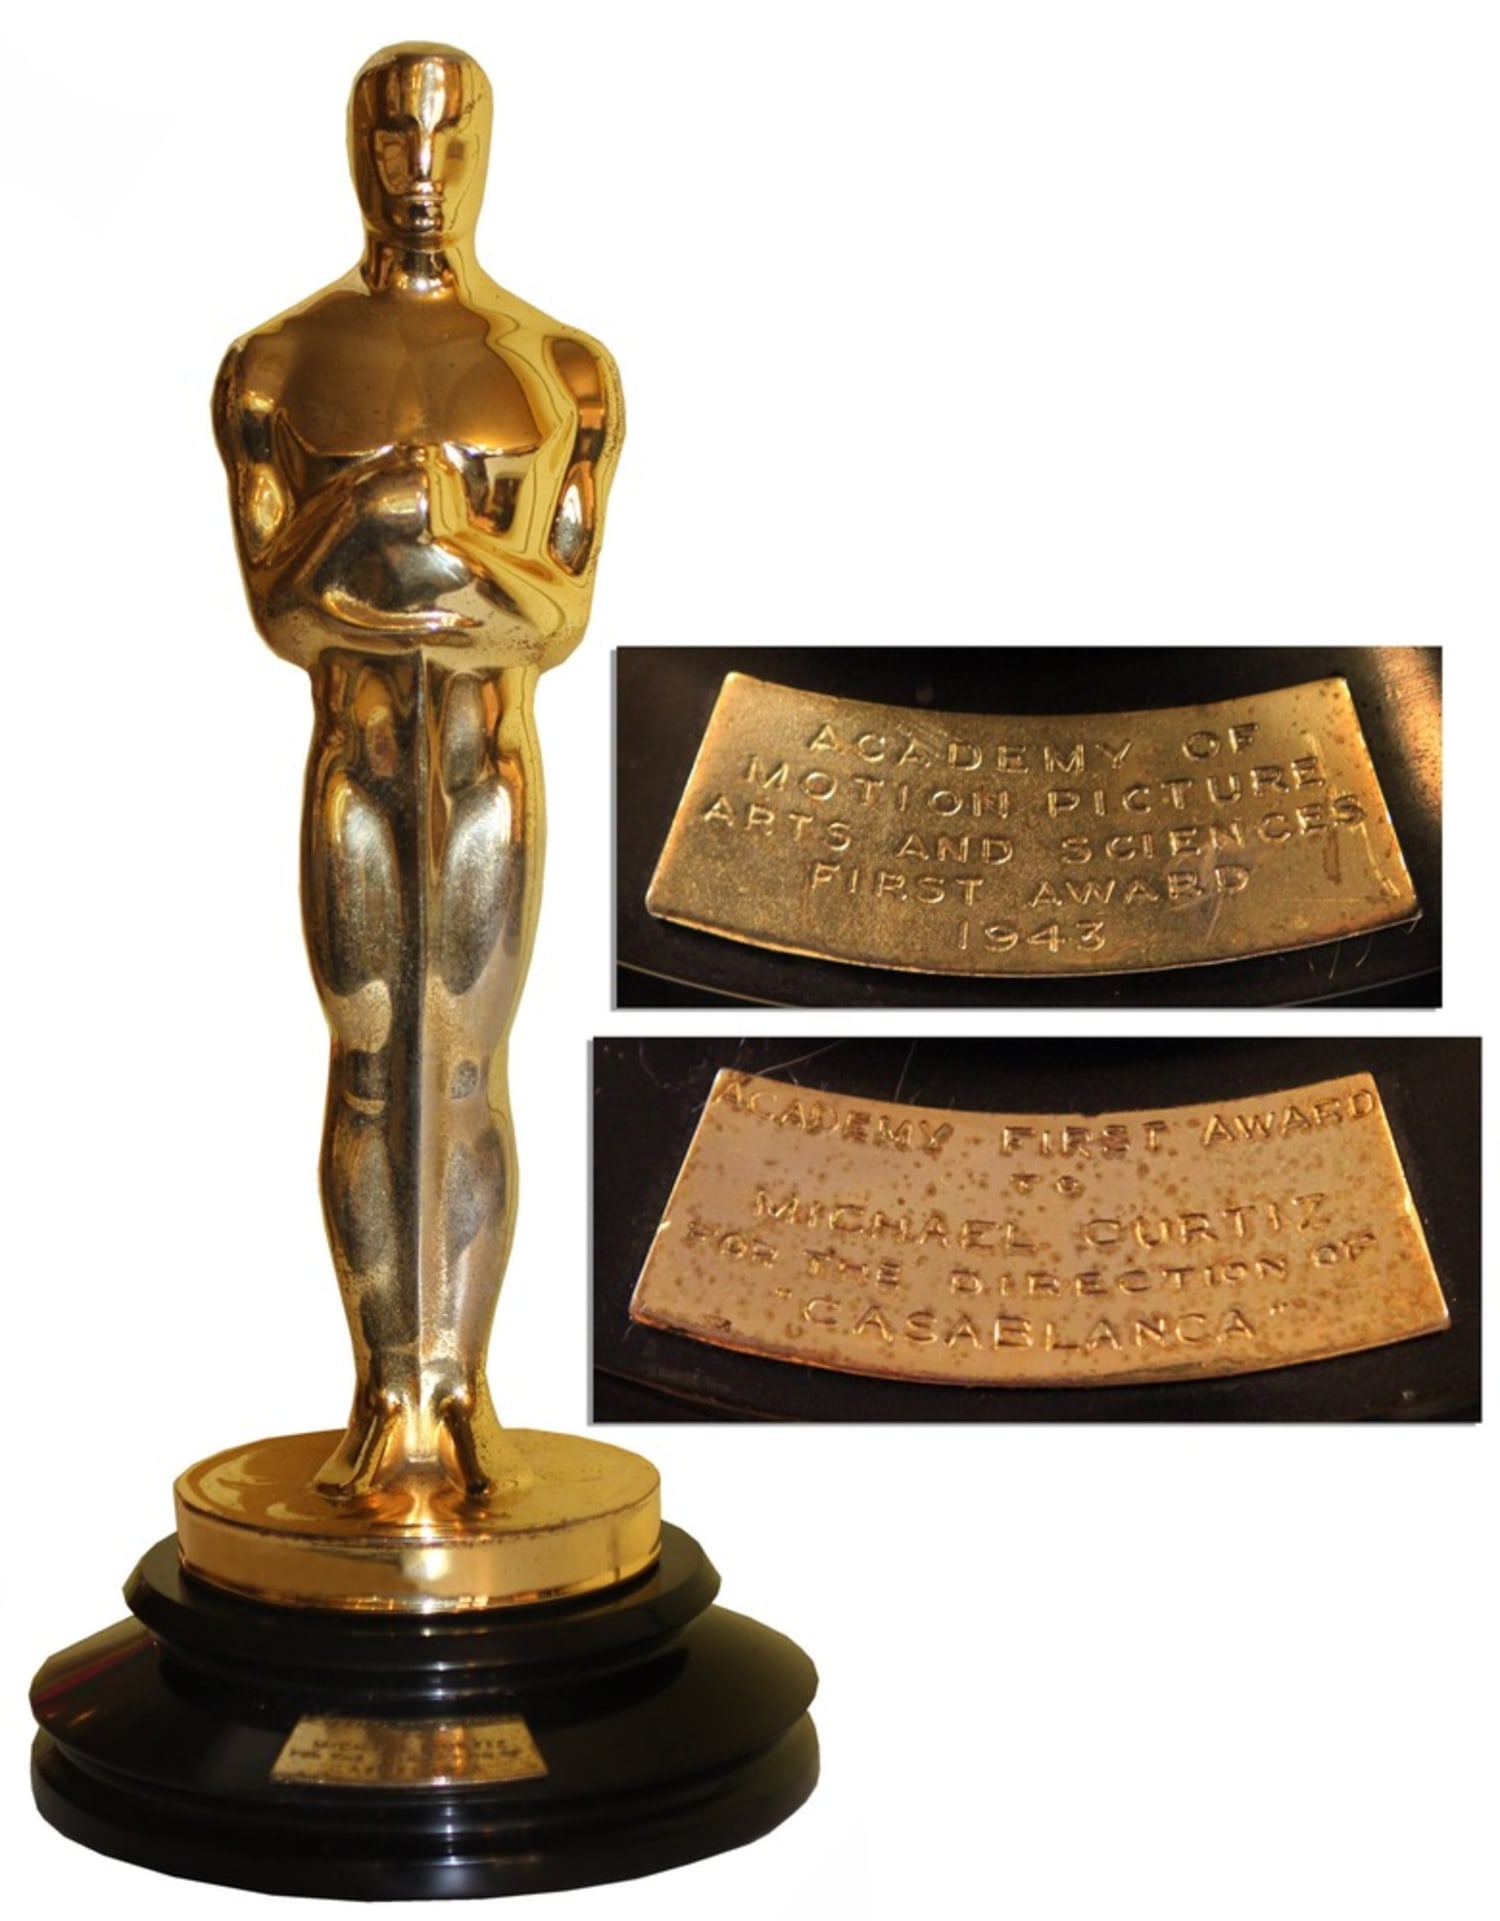 Casablanca' Oscar expected to sell for $3M at auction